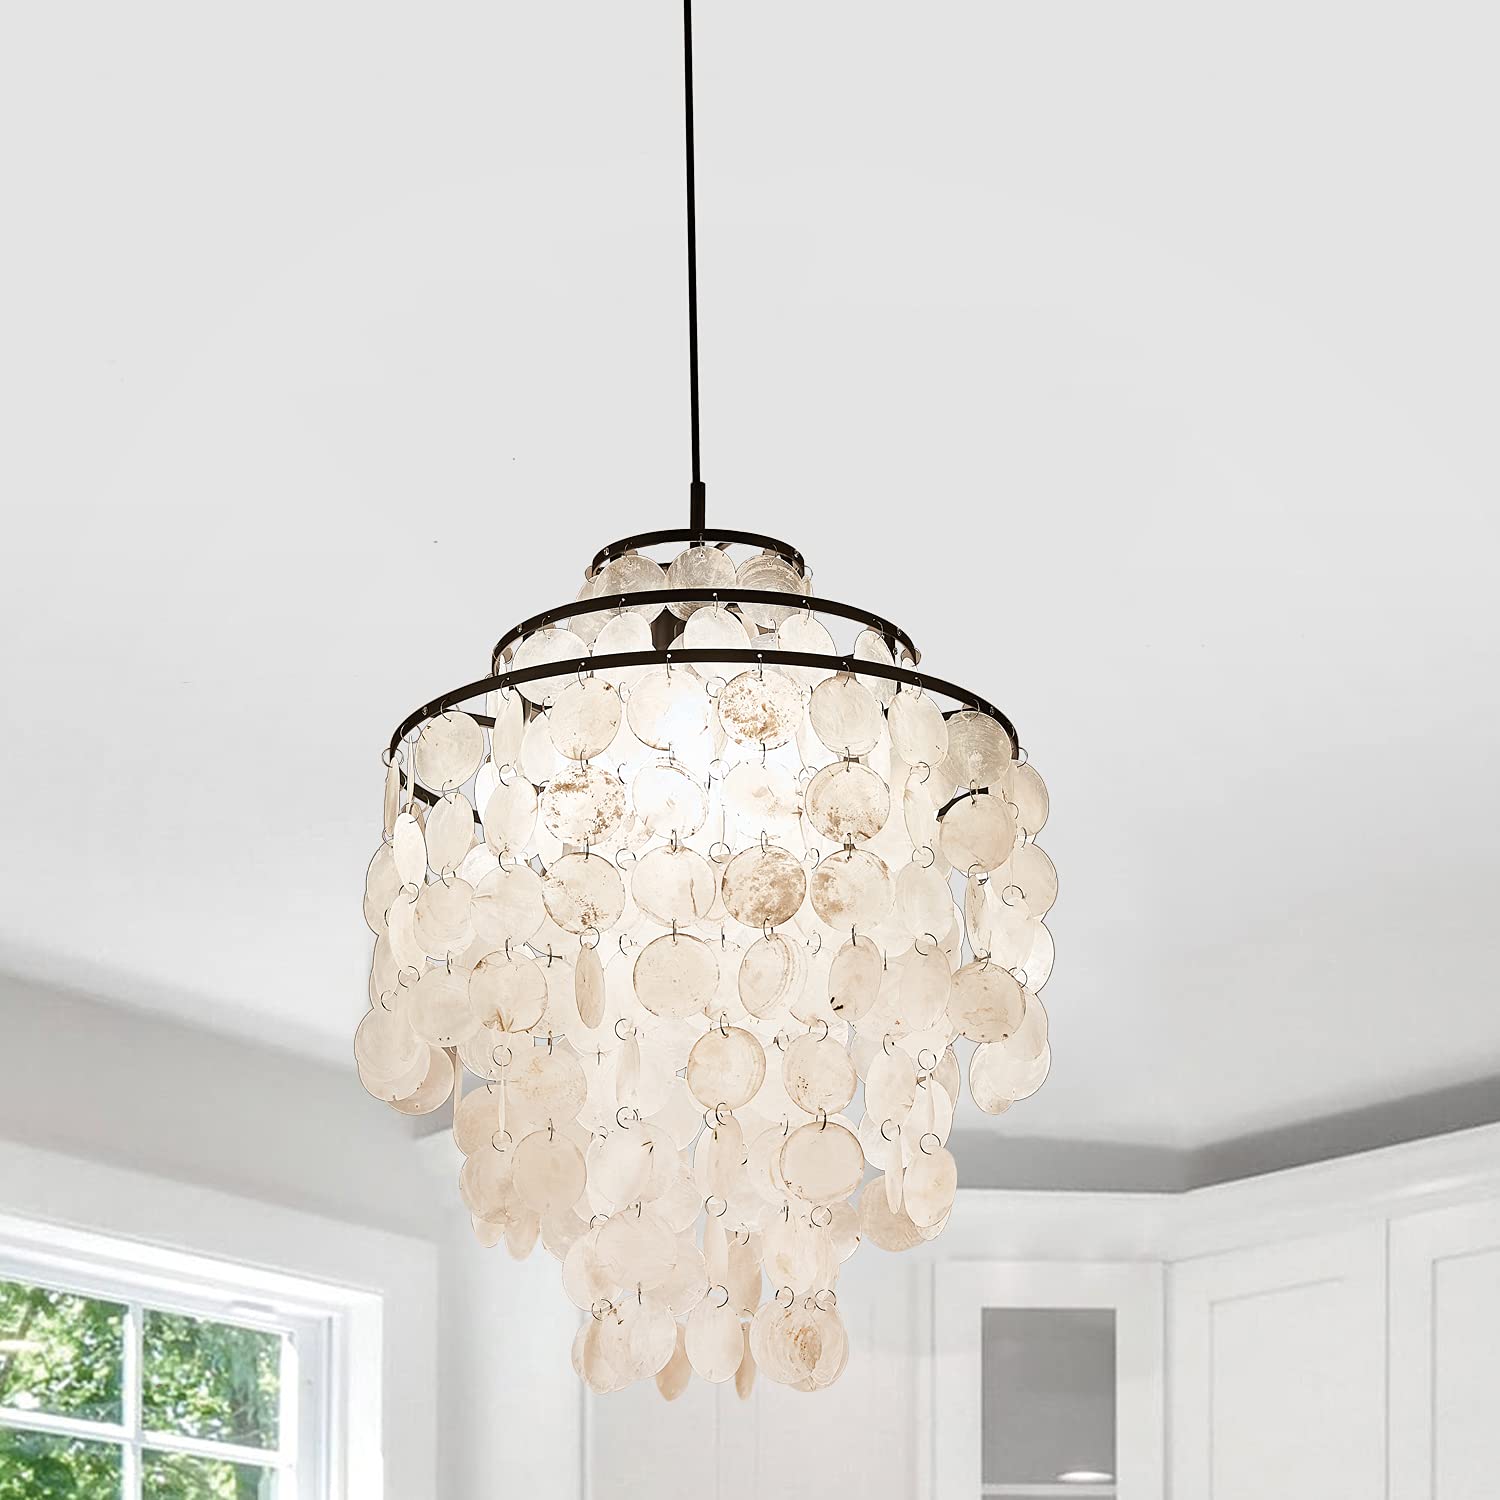 Poserion 3-Light Natural capiz Shells Round chandelier Modern Beach Theme Pendant Lamp ceiling Hanging Fixture for Dining Room D